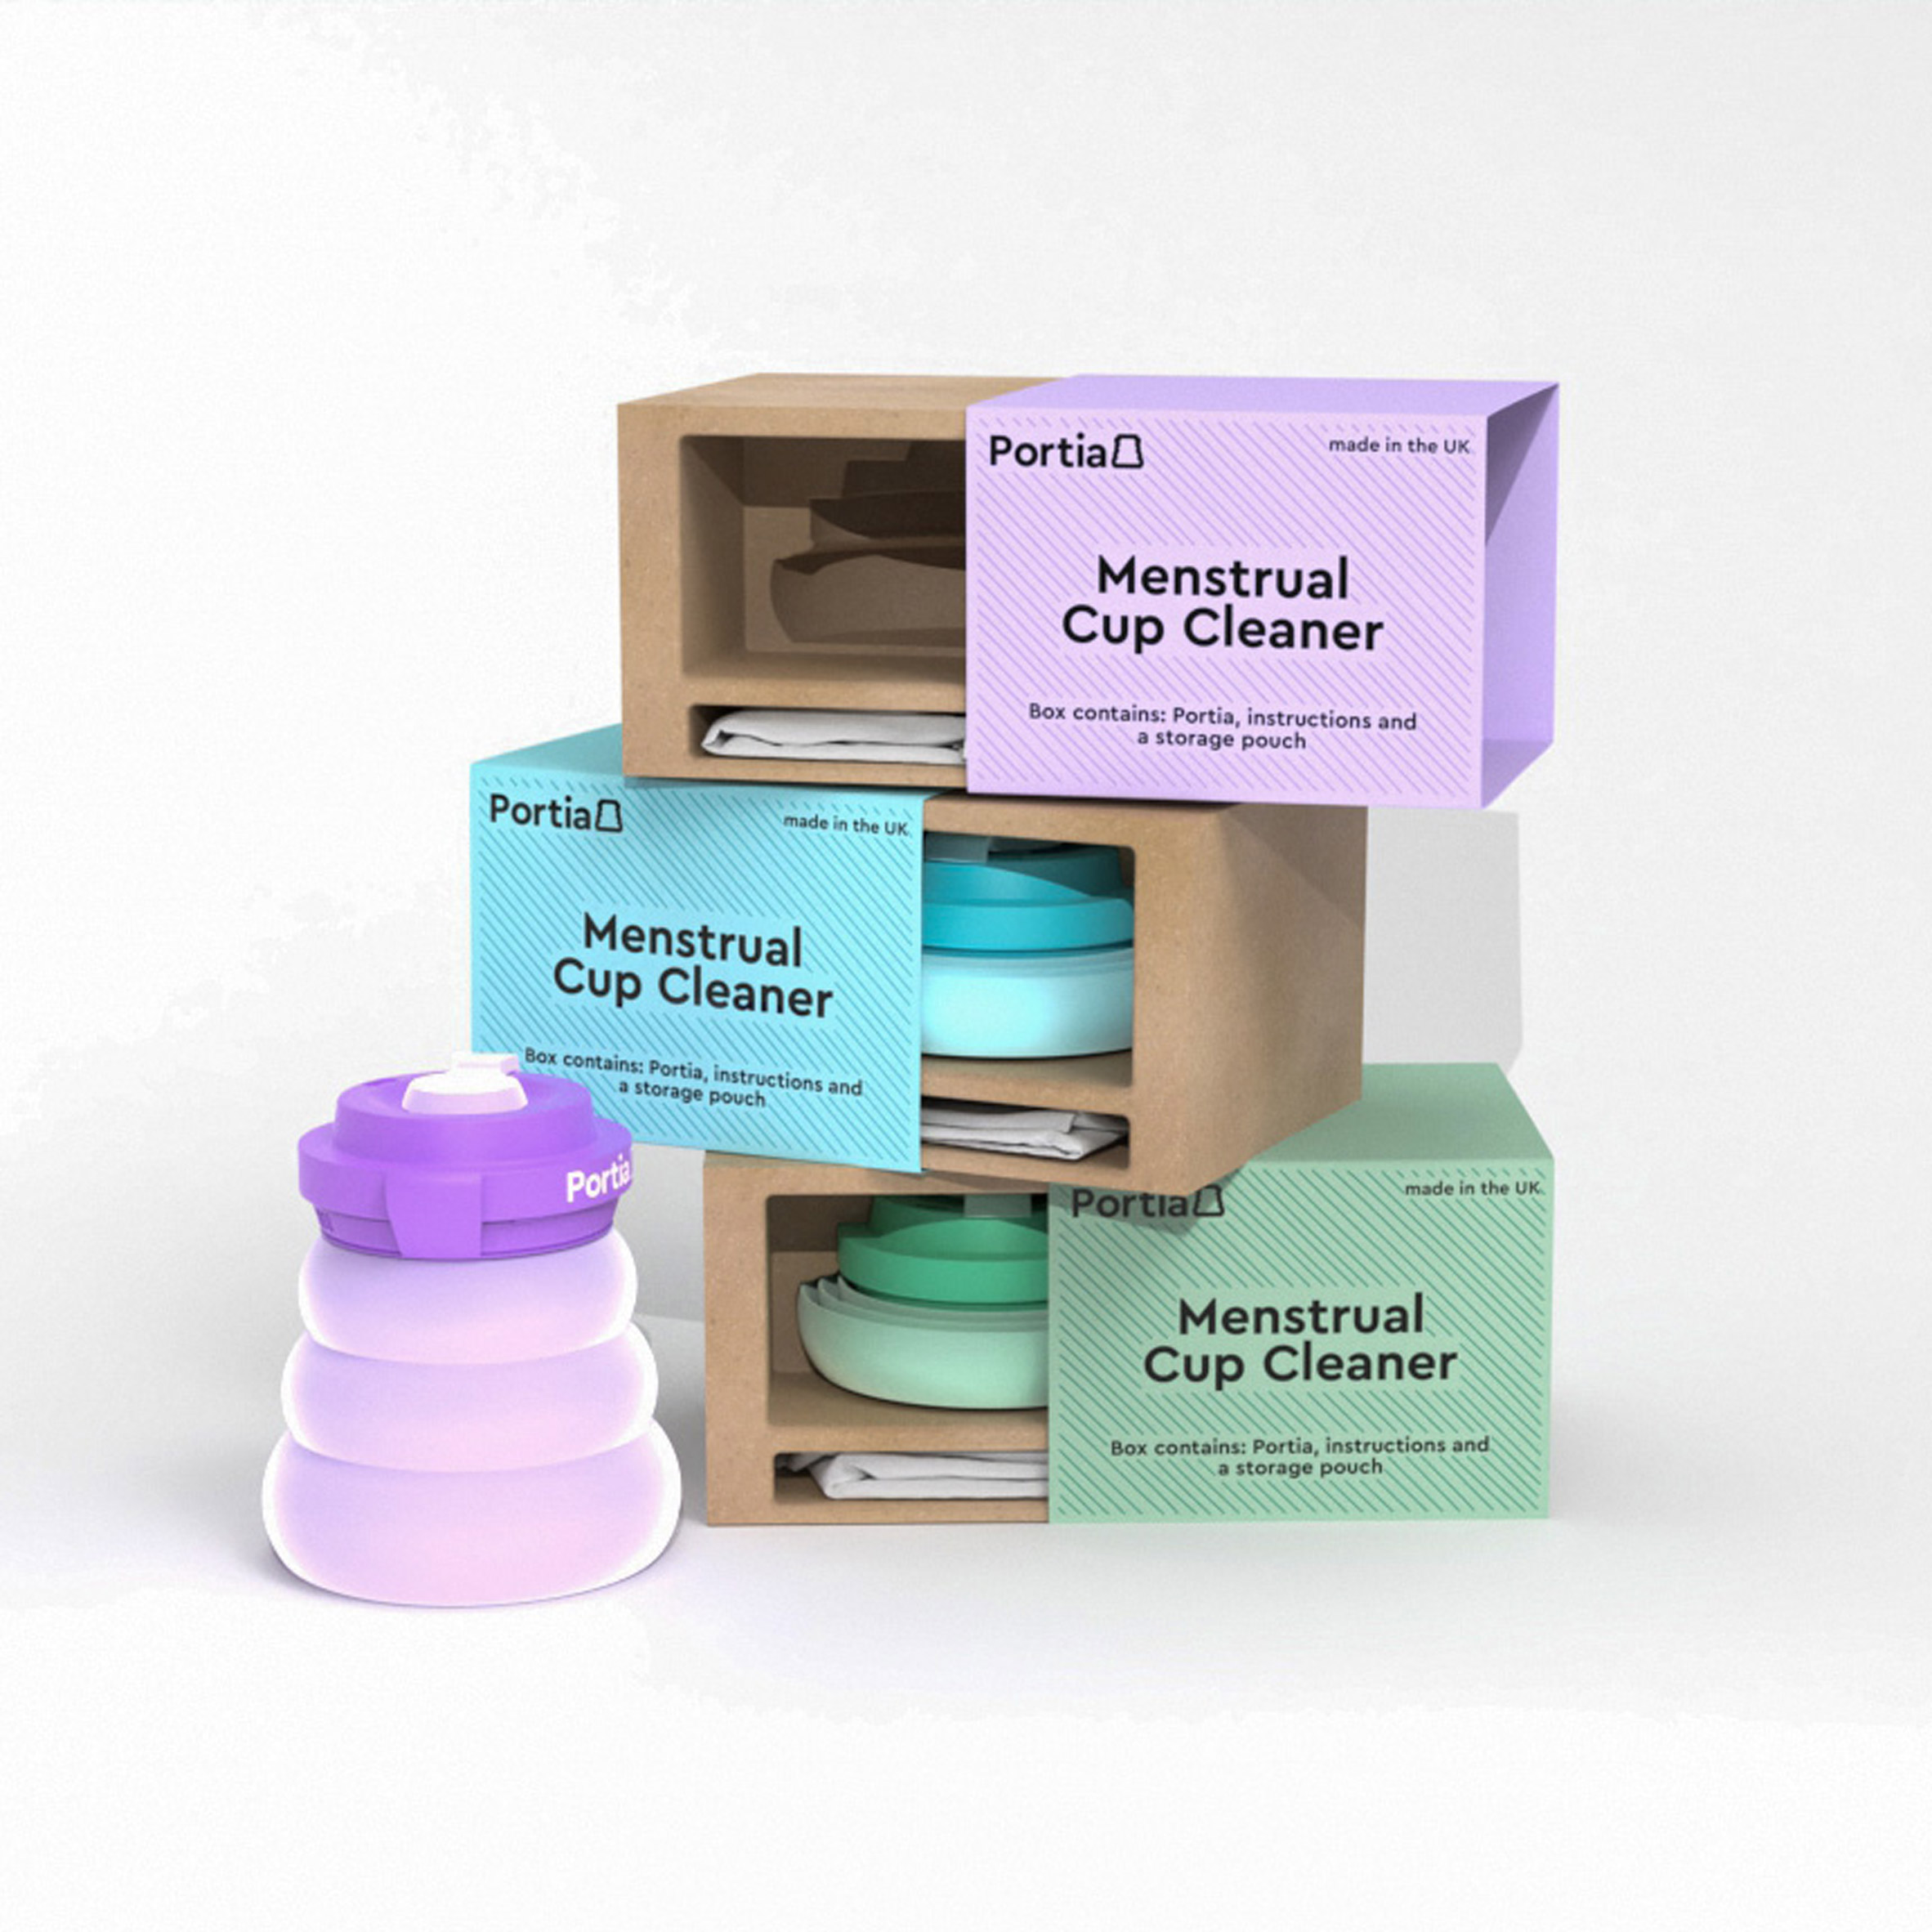 Pastel coloured products in wooden boxes